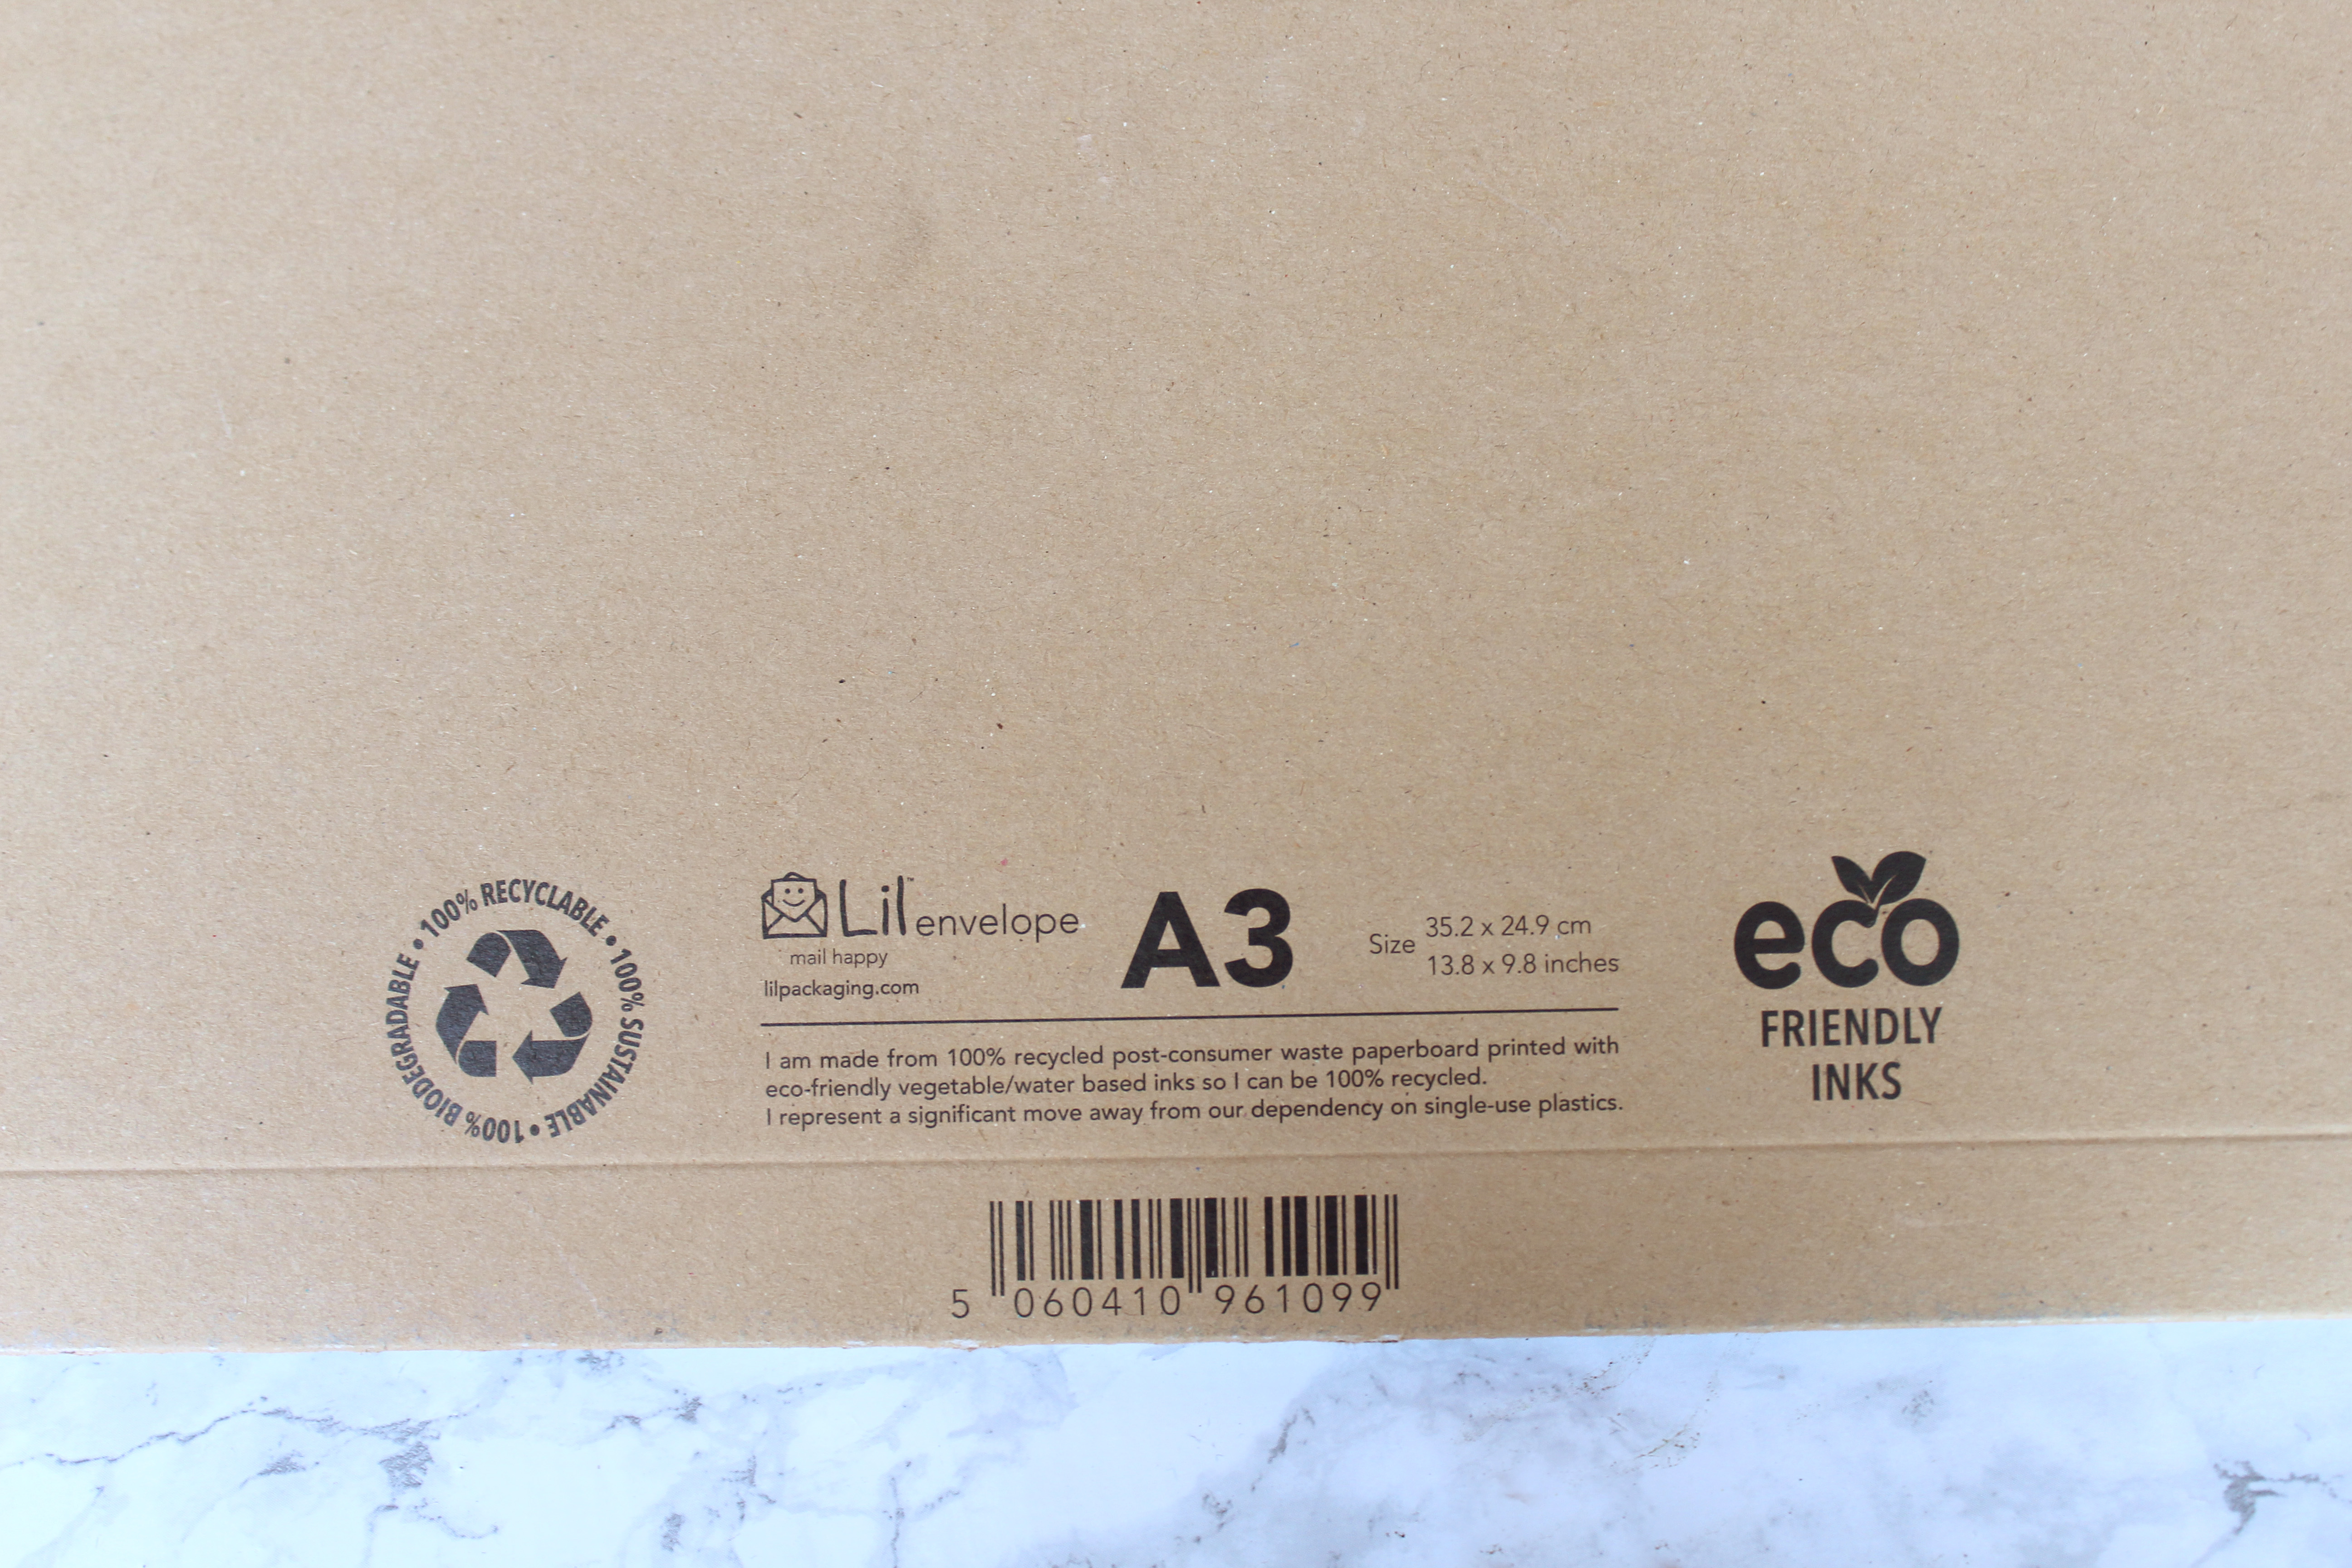 Eco-friendly packaging - cardboard envelopes with eco friendly inks.